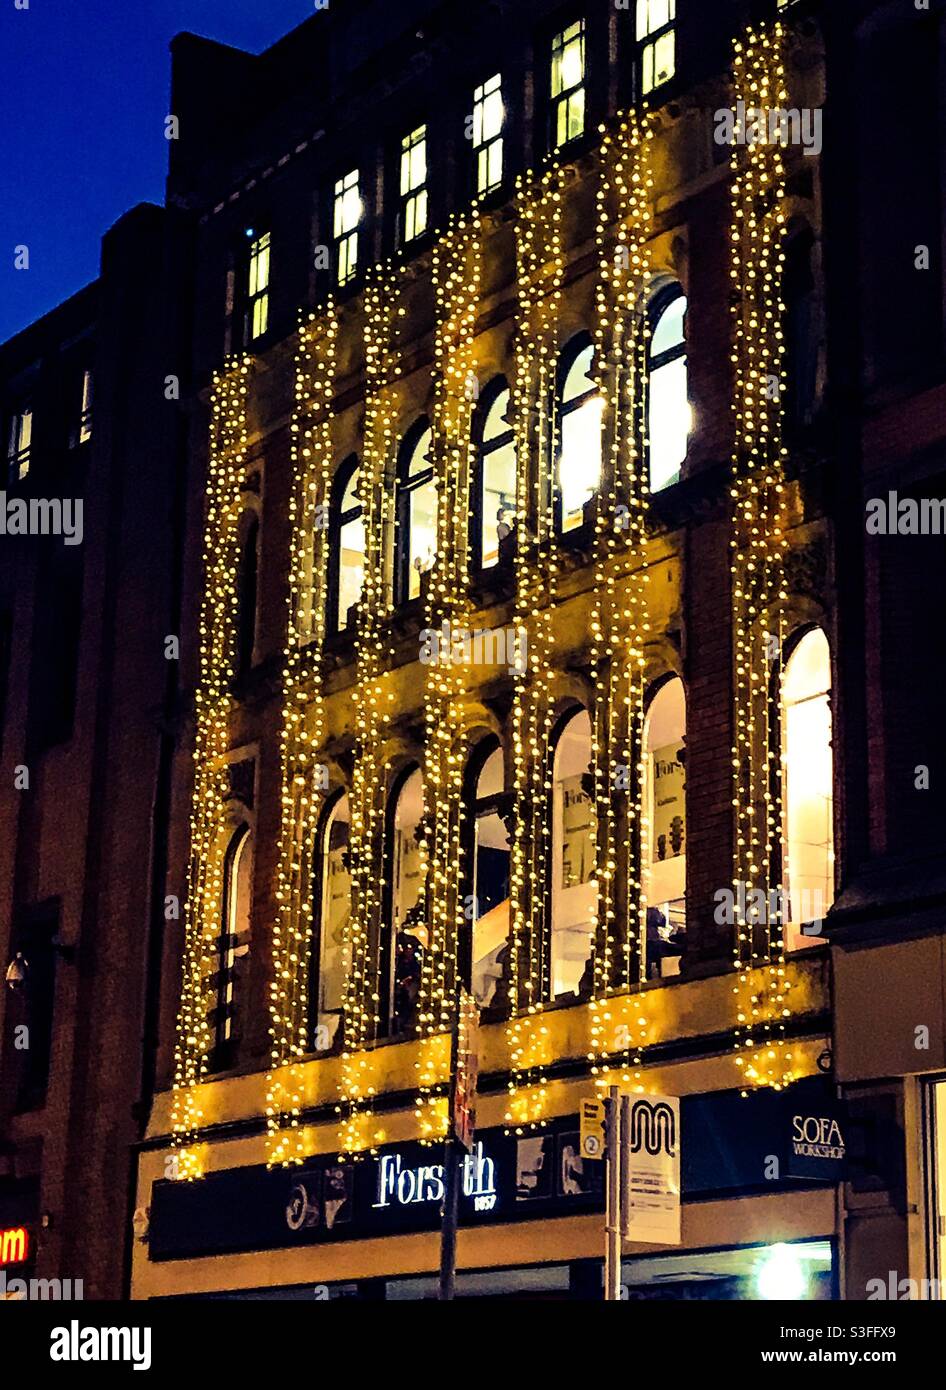 Manchester music shop at Christmas Stock Photo